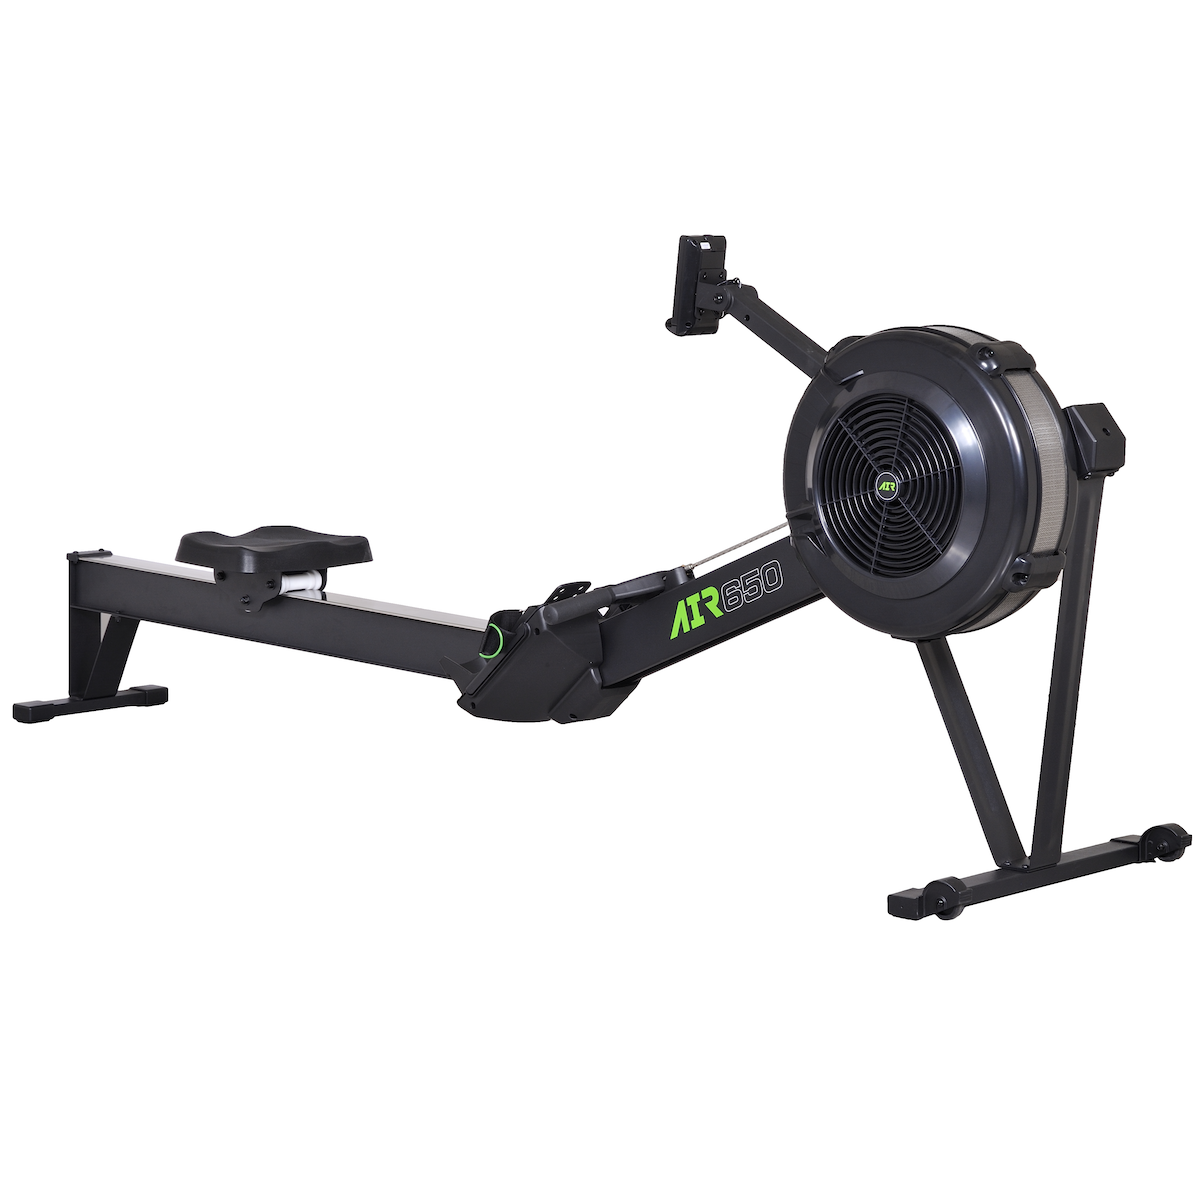 Semi-Commercial, FTMS, Jkexer 650 Air Rower